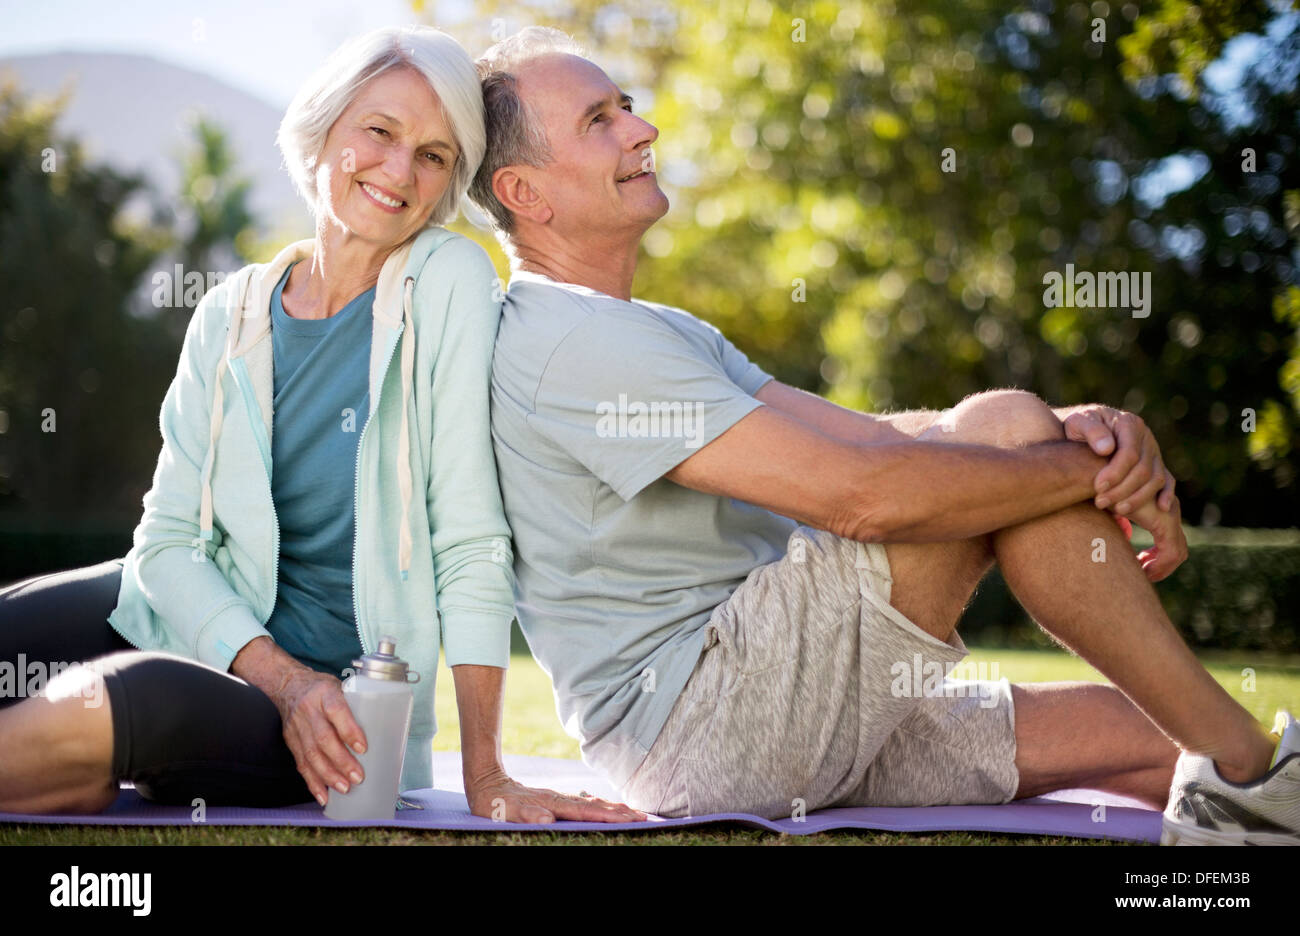 Senior couple sitting on yoga mat in park Banque D'Images